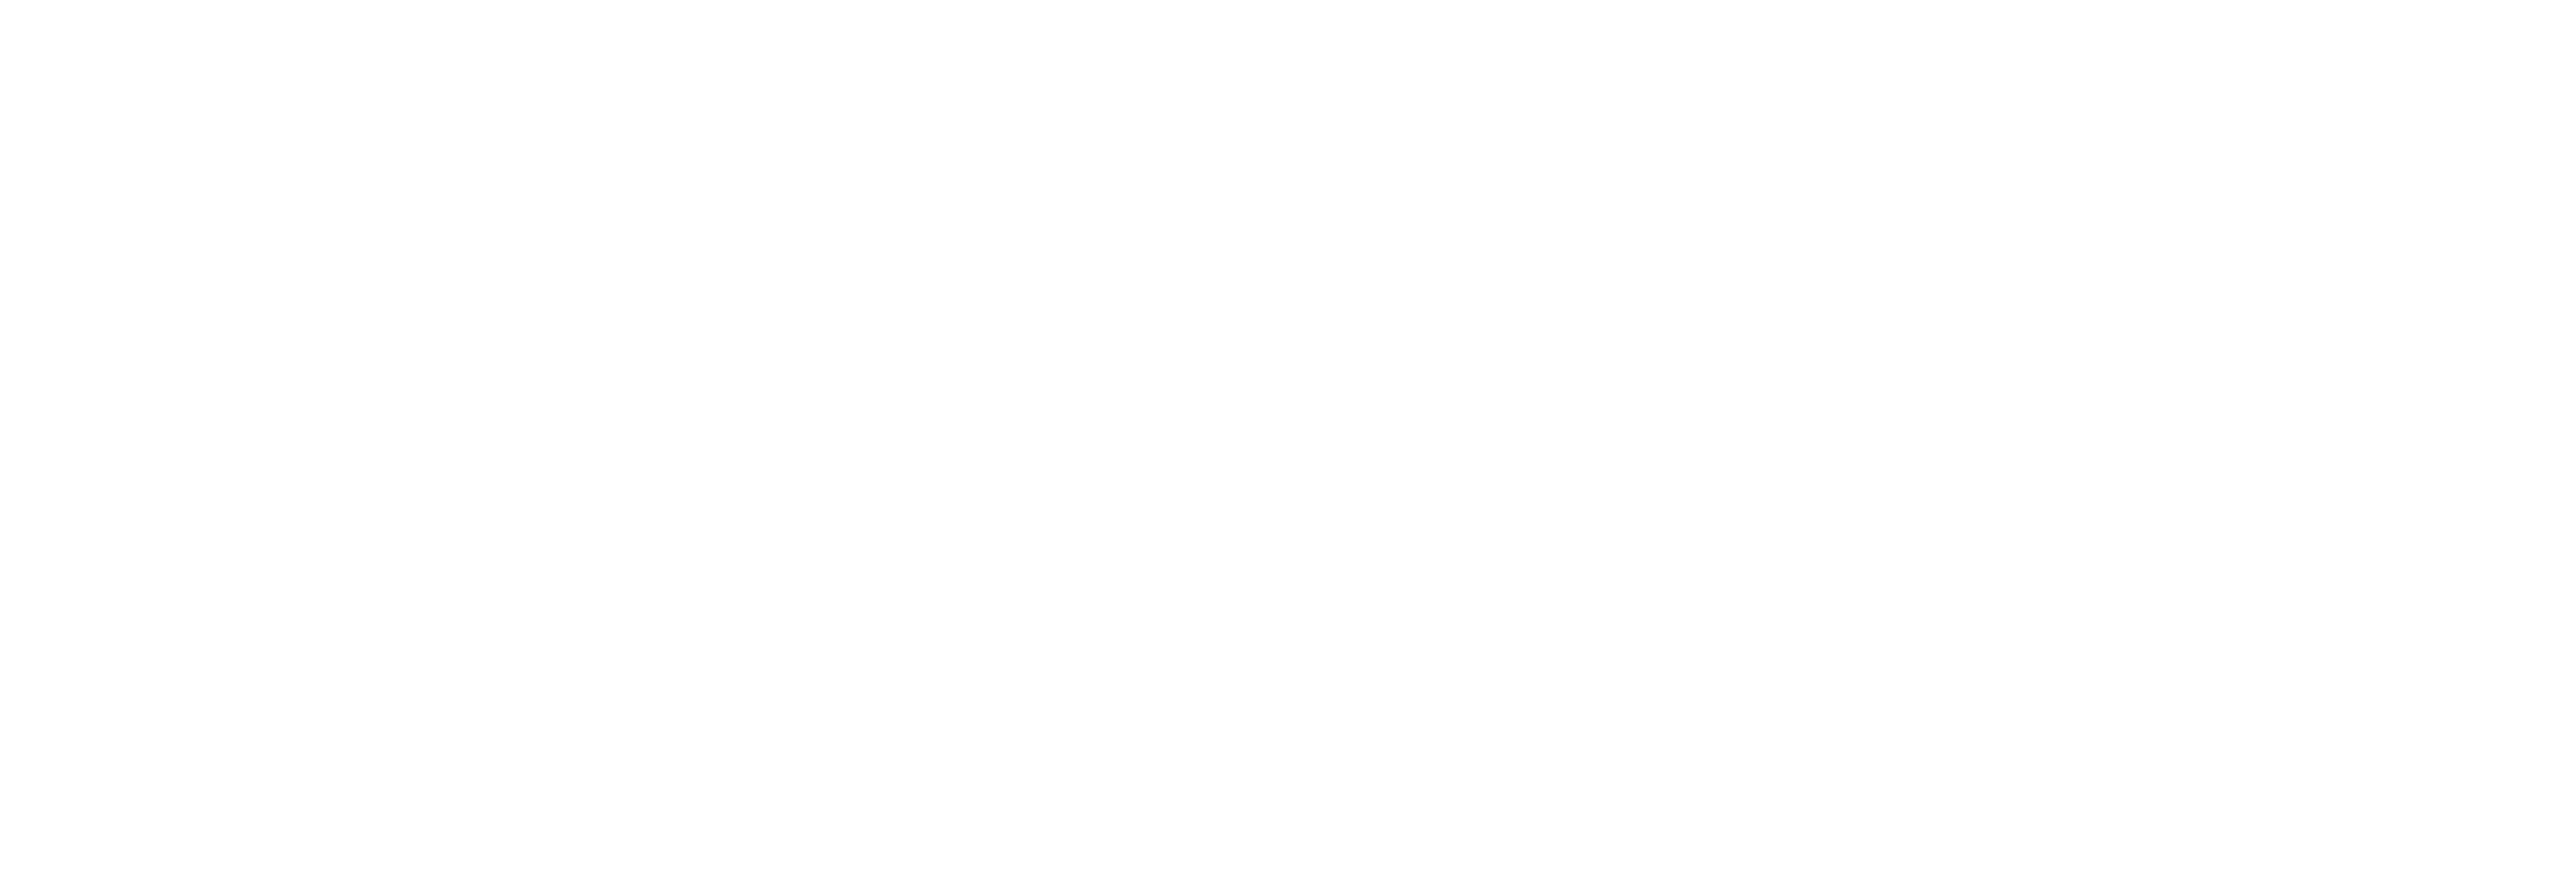 Cooling Concepts